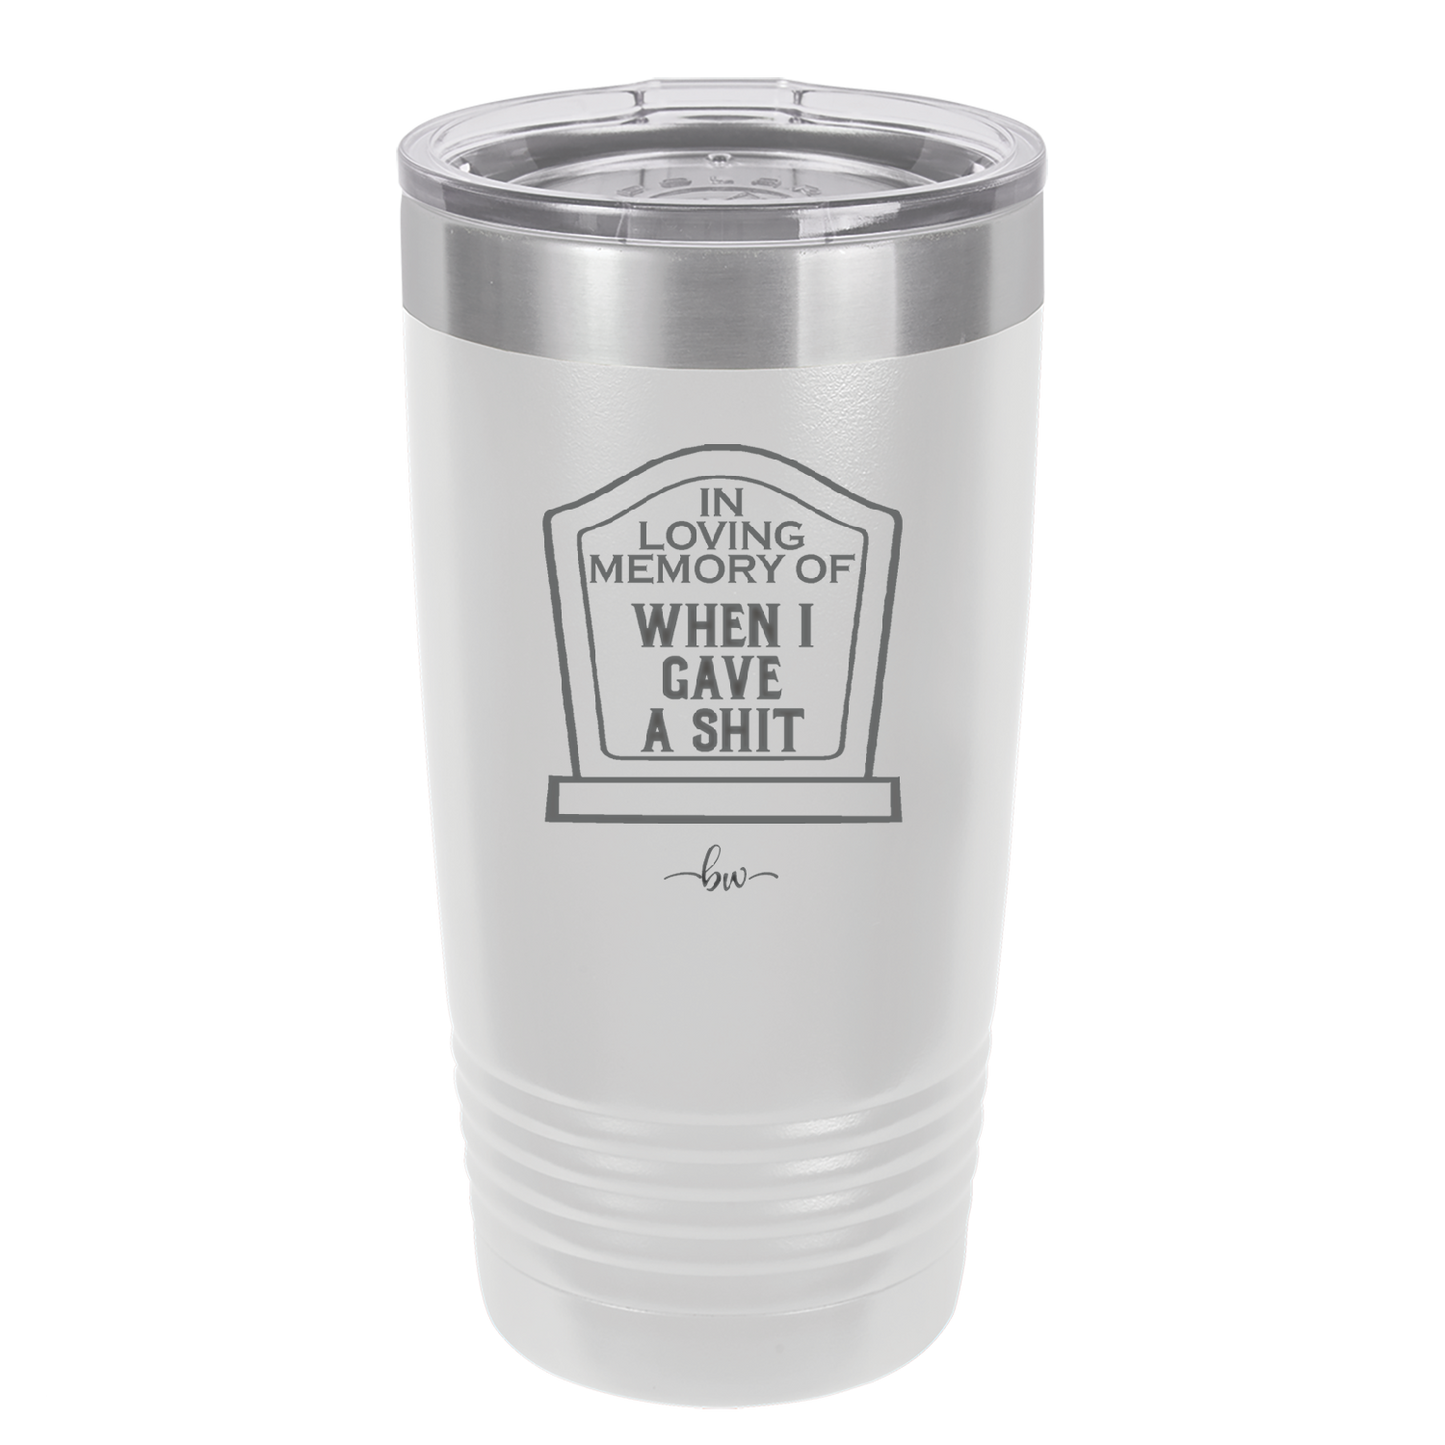 In Loving Memory of When I Gave a Shit - Laser Engraved Stainless Steel Drinkware - 1199 -